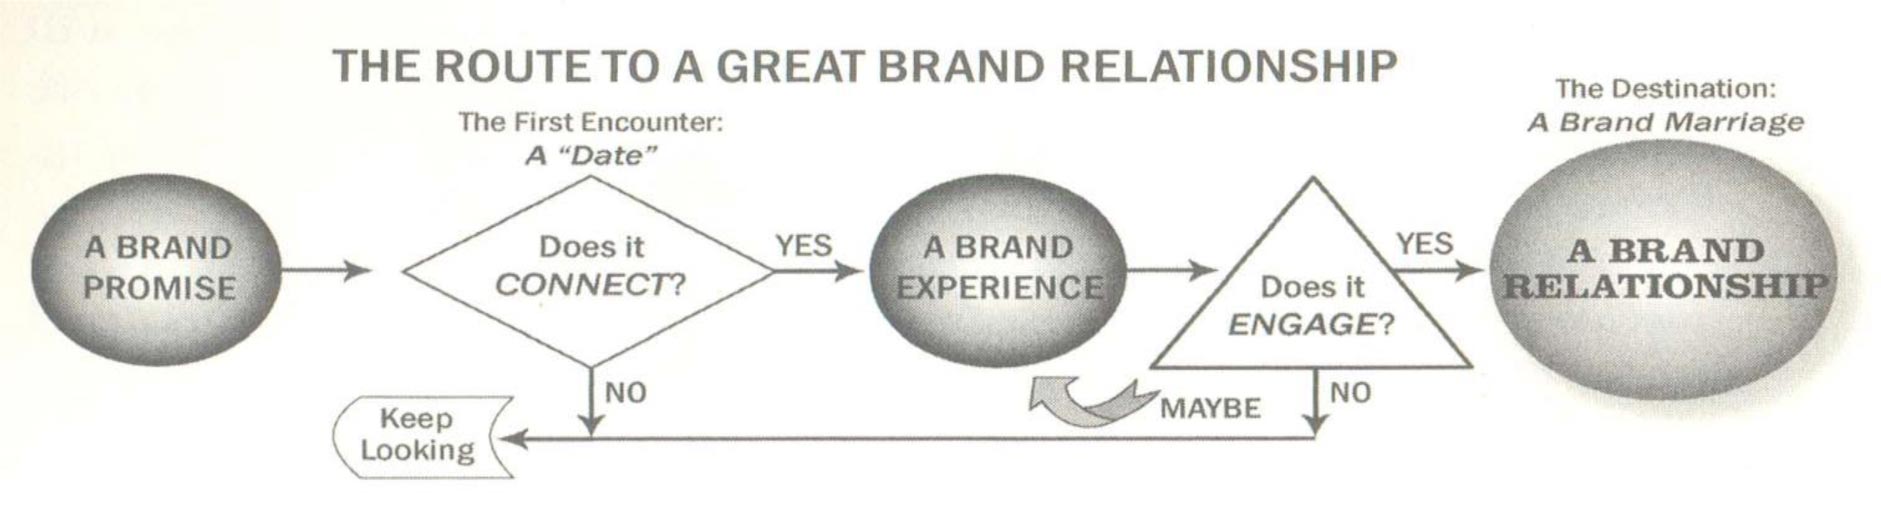 Great-Brand-Relationship